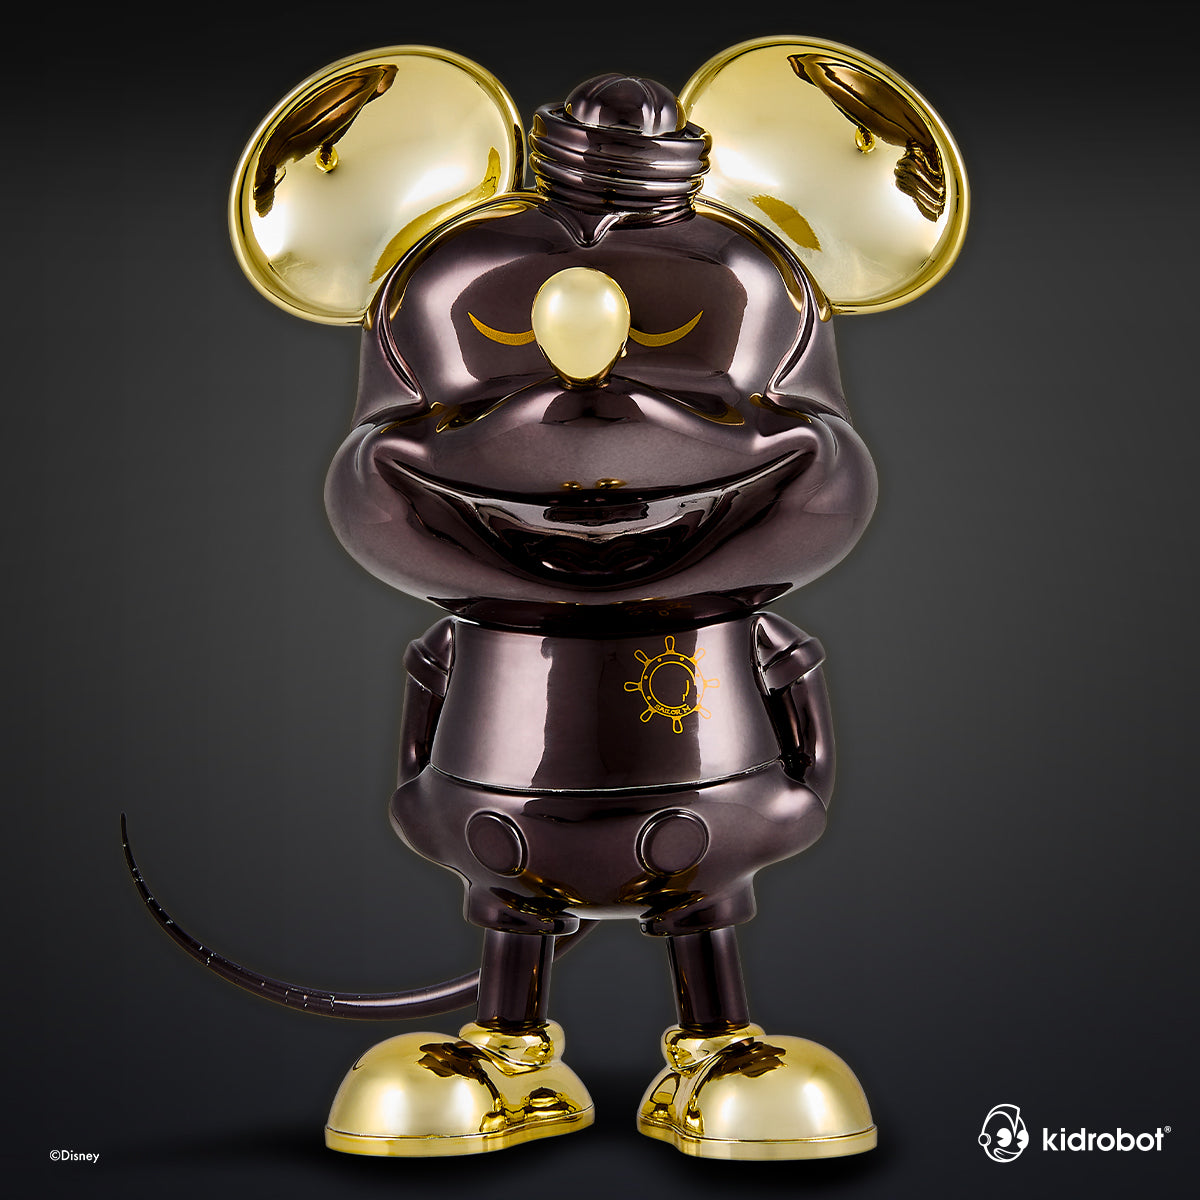 Disney Mickey Mouse "Sailor M." Collectible Vinyl Figure by Pasa - Exclusive Black and Gold Edition